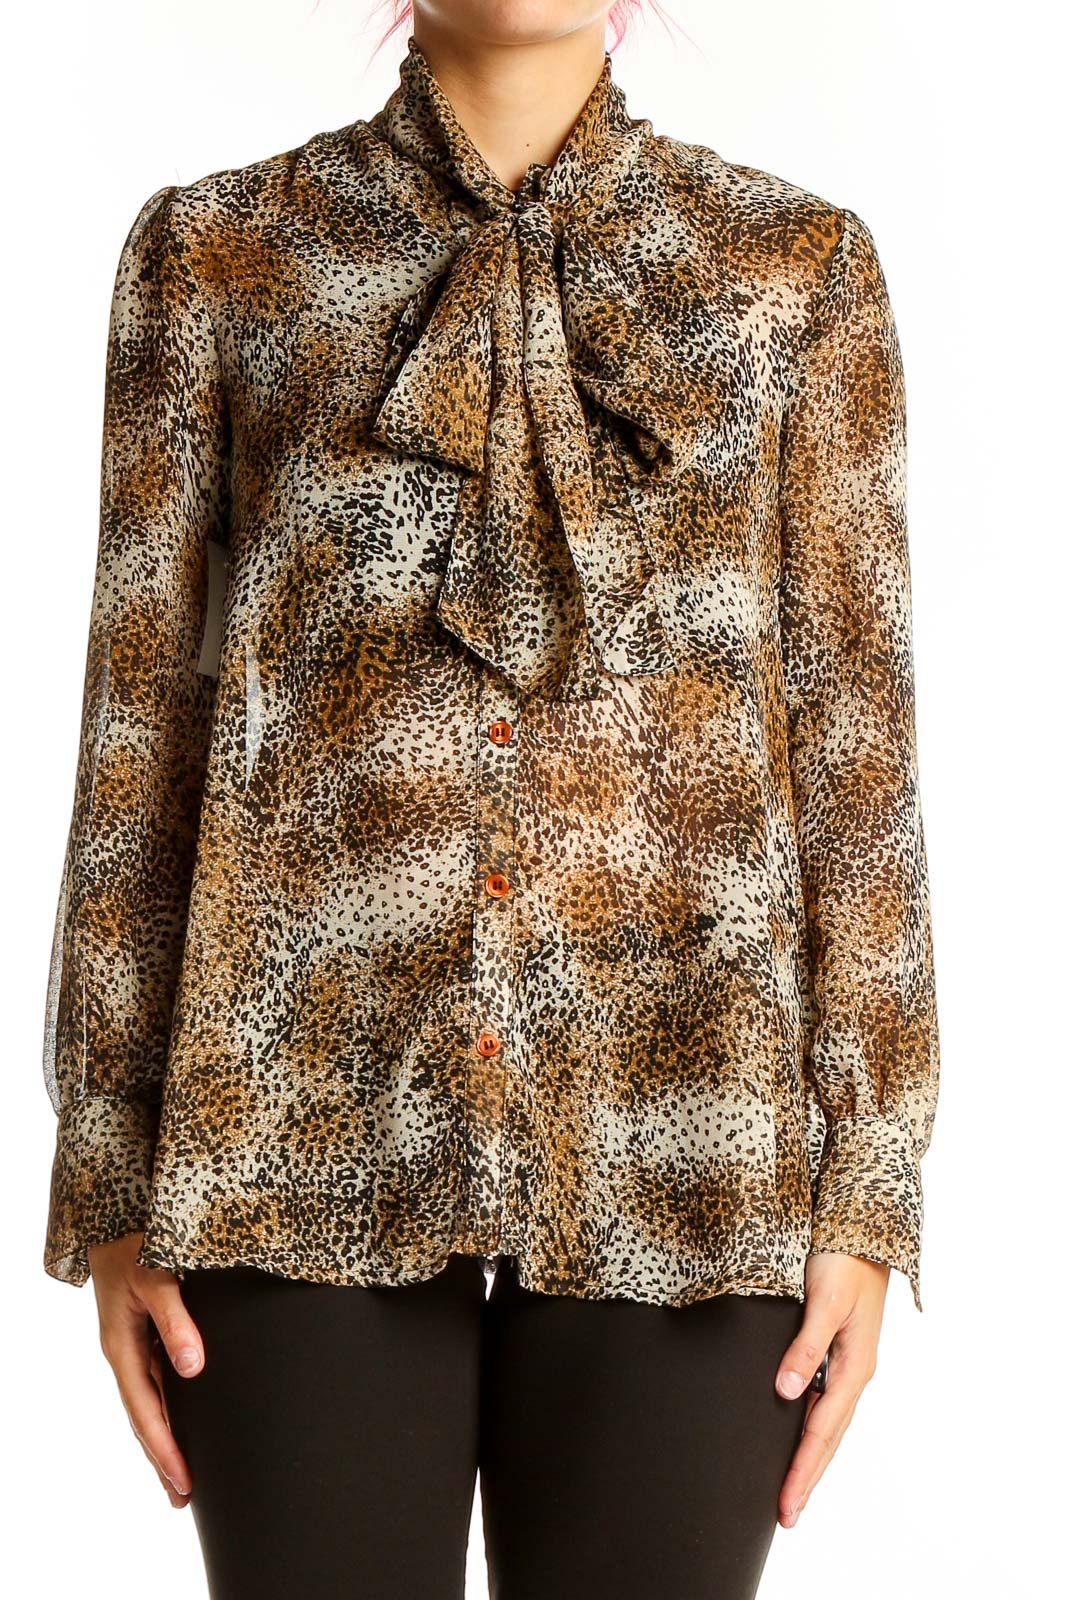 Neutral Animal Print Blouse Front